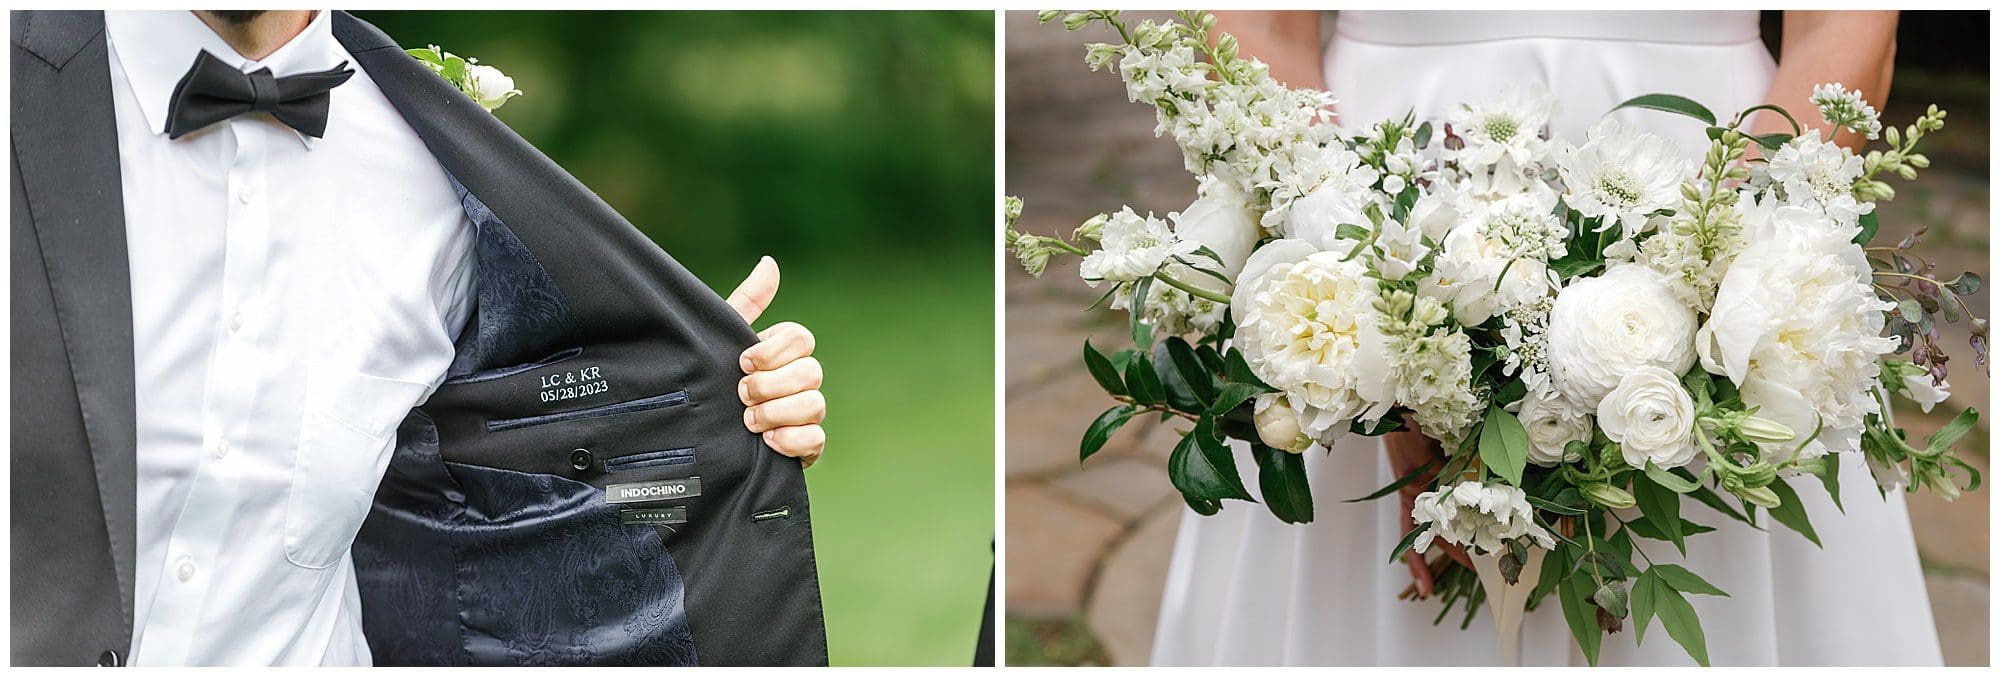 Detail photos of groom's jacket with bride and groom's initials and wedding date 